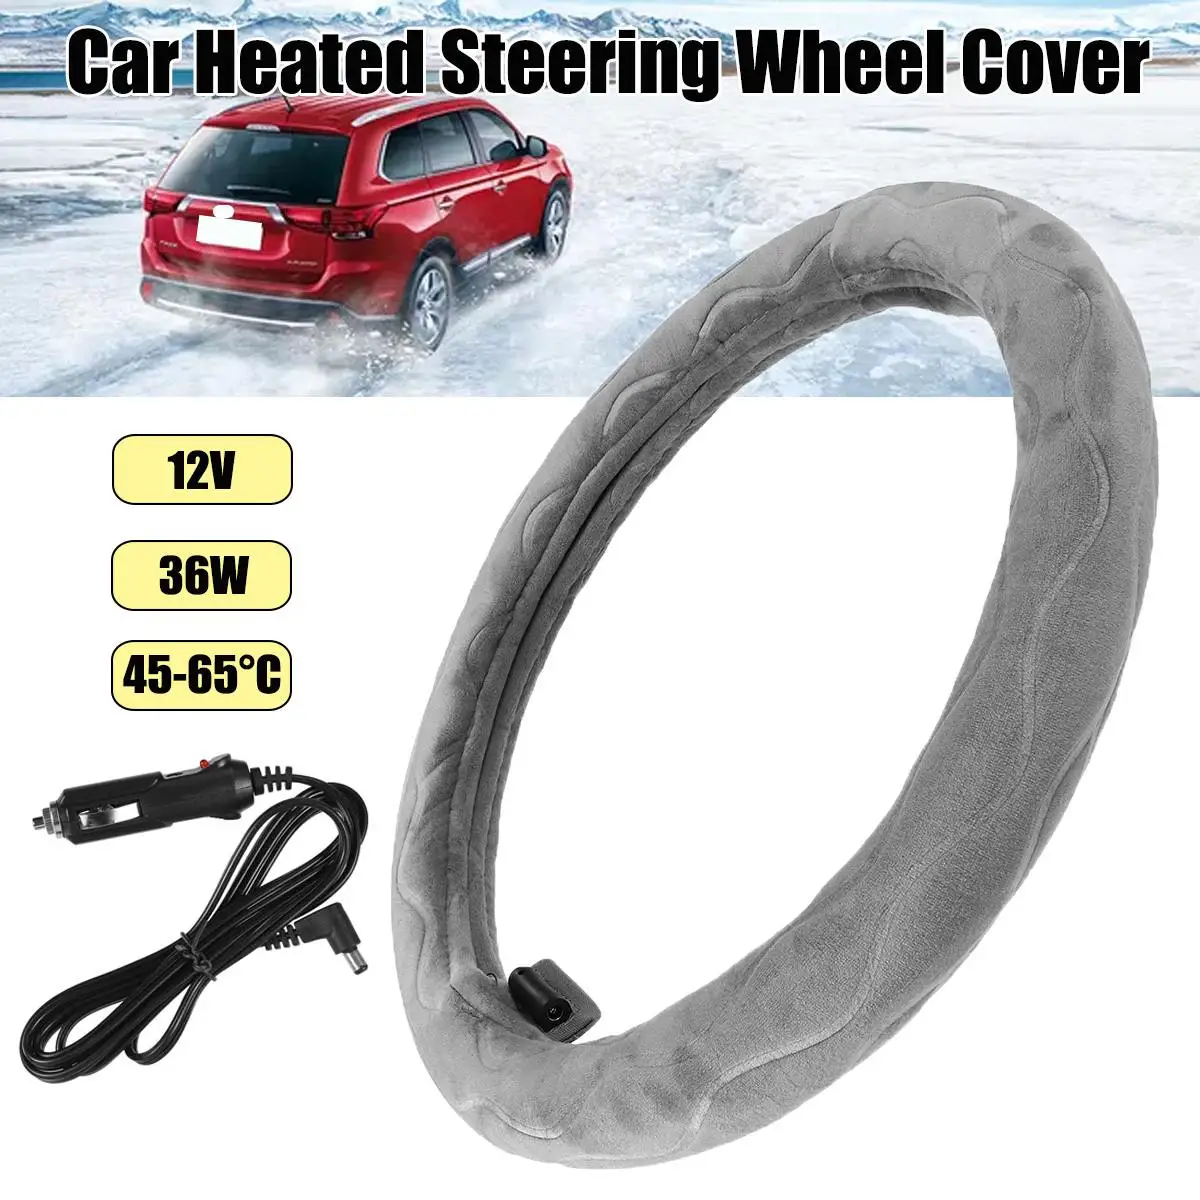 Universal Car Steering Wheel Cover 38cm 12V Auto Heated Winter Warm Cover with Charger Electric Heating car accessories interior